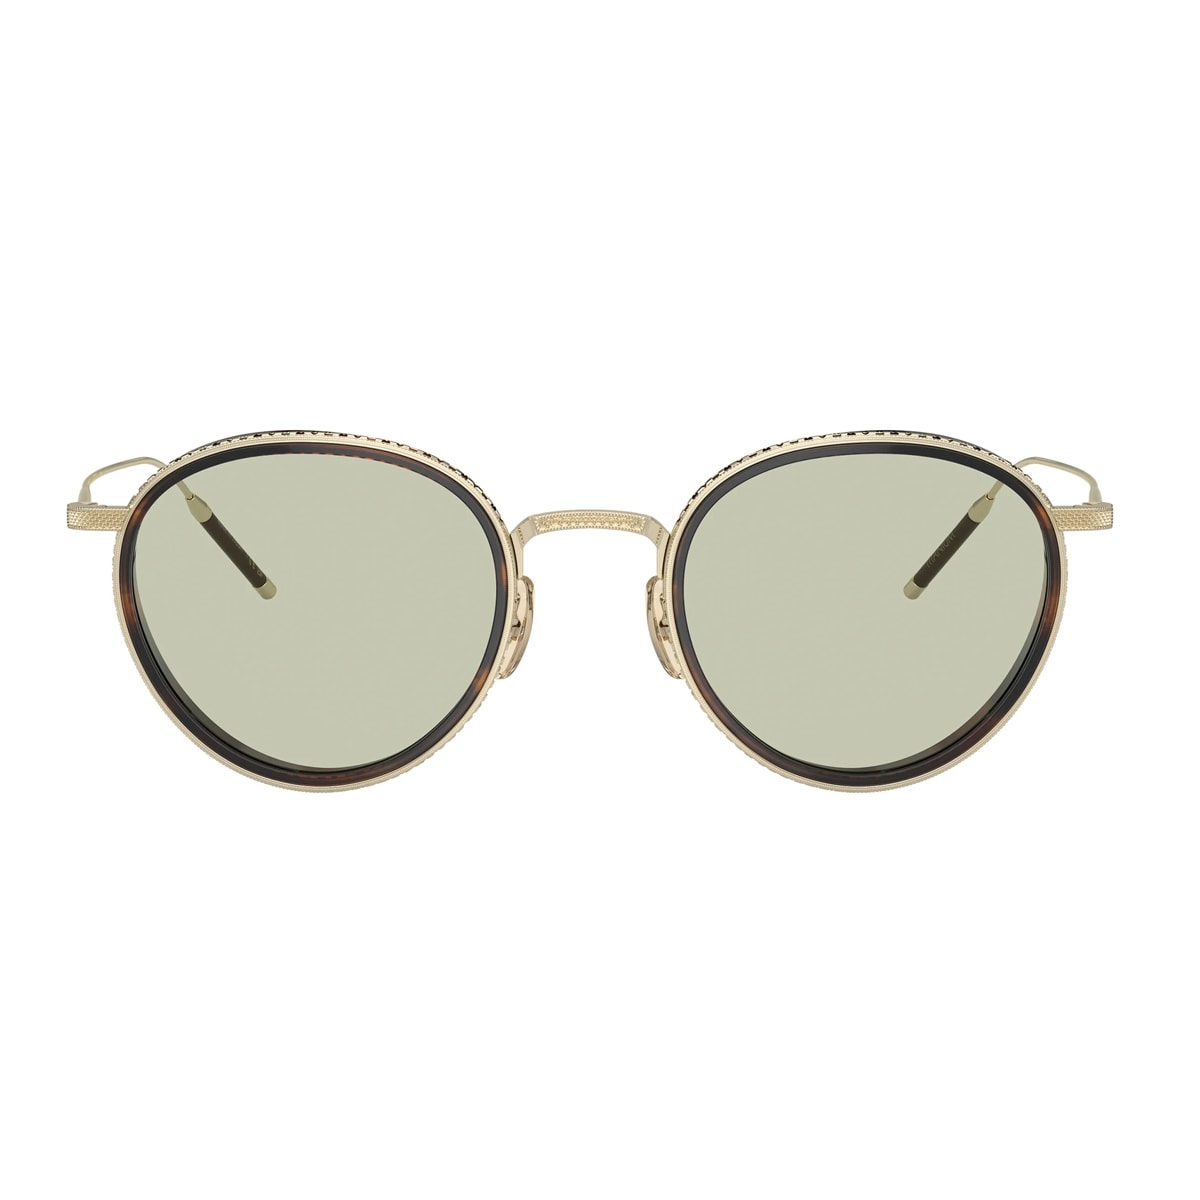 Oliver Peoples Ov1318t - Tk-8 5129 Gold/tuscany Tortoise Glasses In Brown